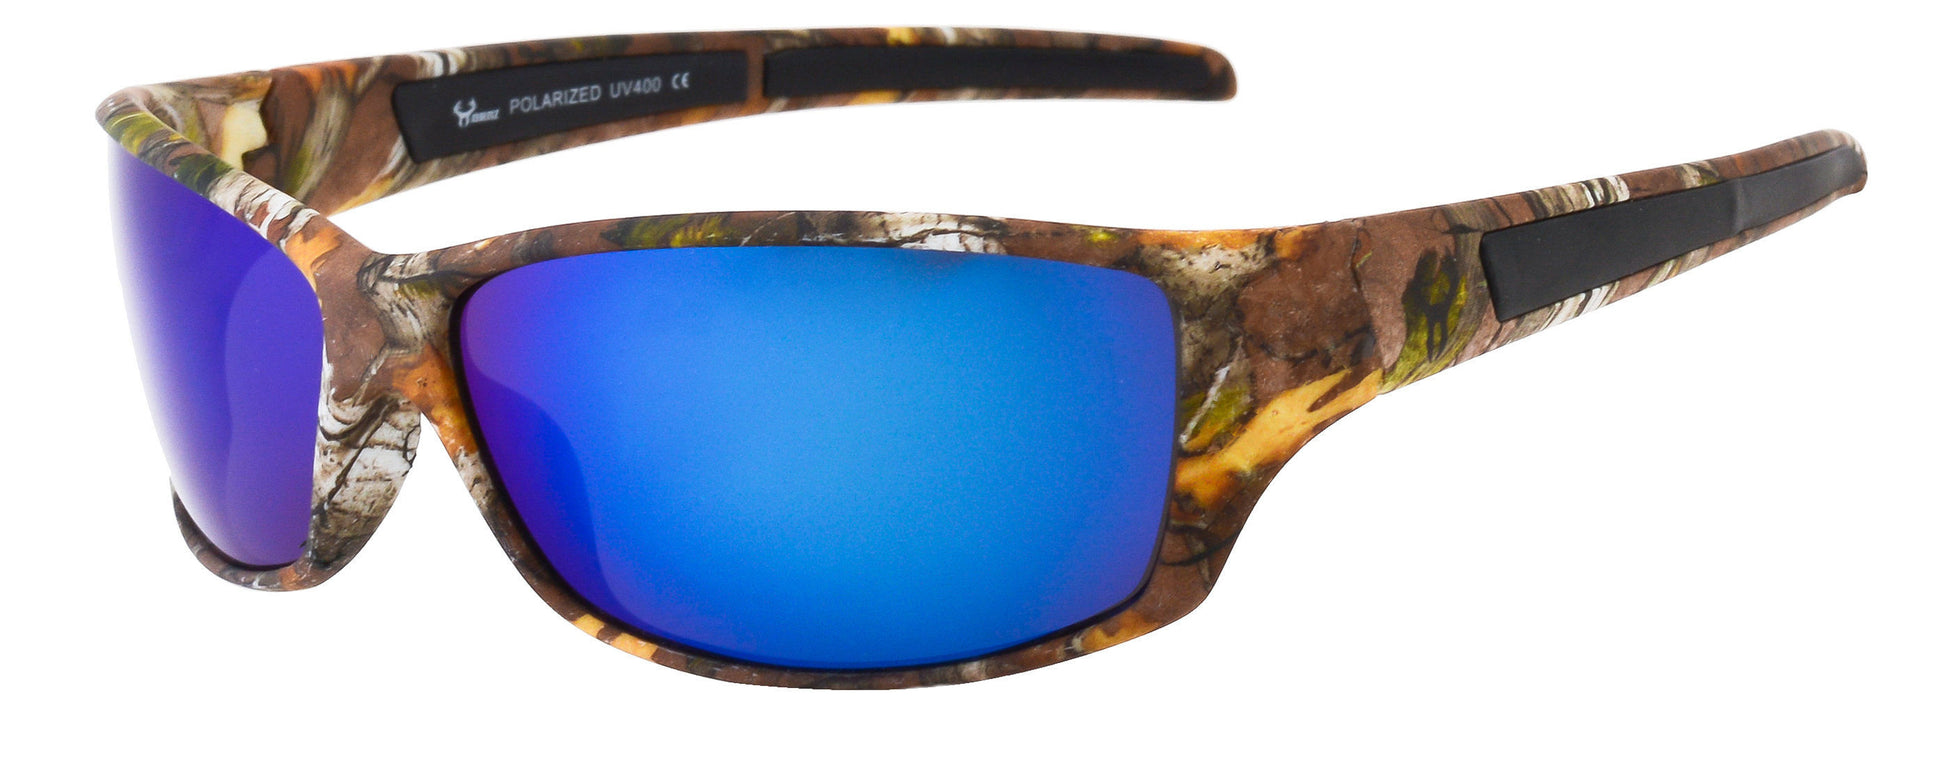 Main image: Hornz Brown Forest Camouflage Polarized Sunglasses for Men Full Frame & Free Matching Microfiber Pouch – Brown Camo Frame – Blue Lens